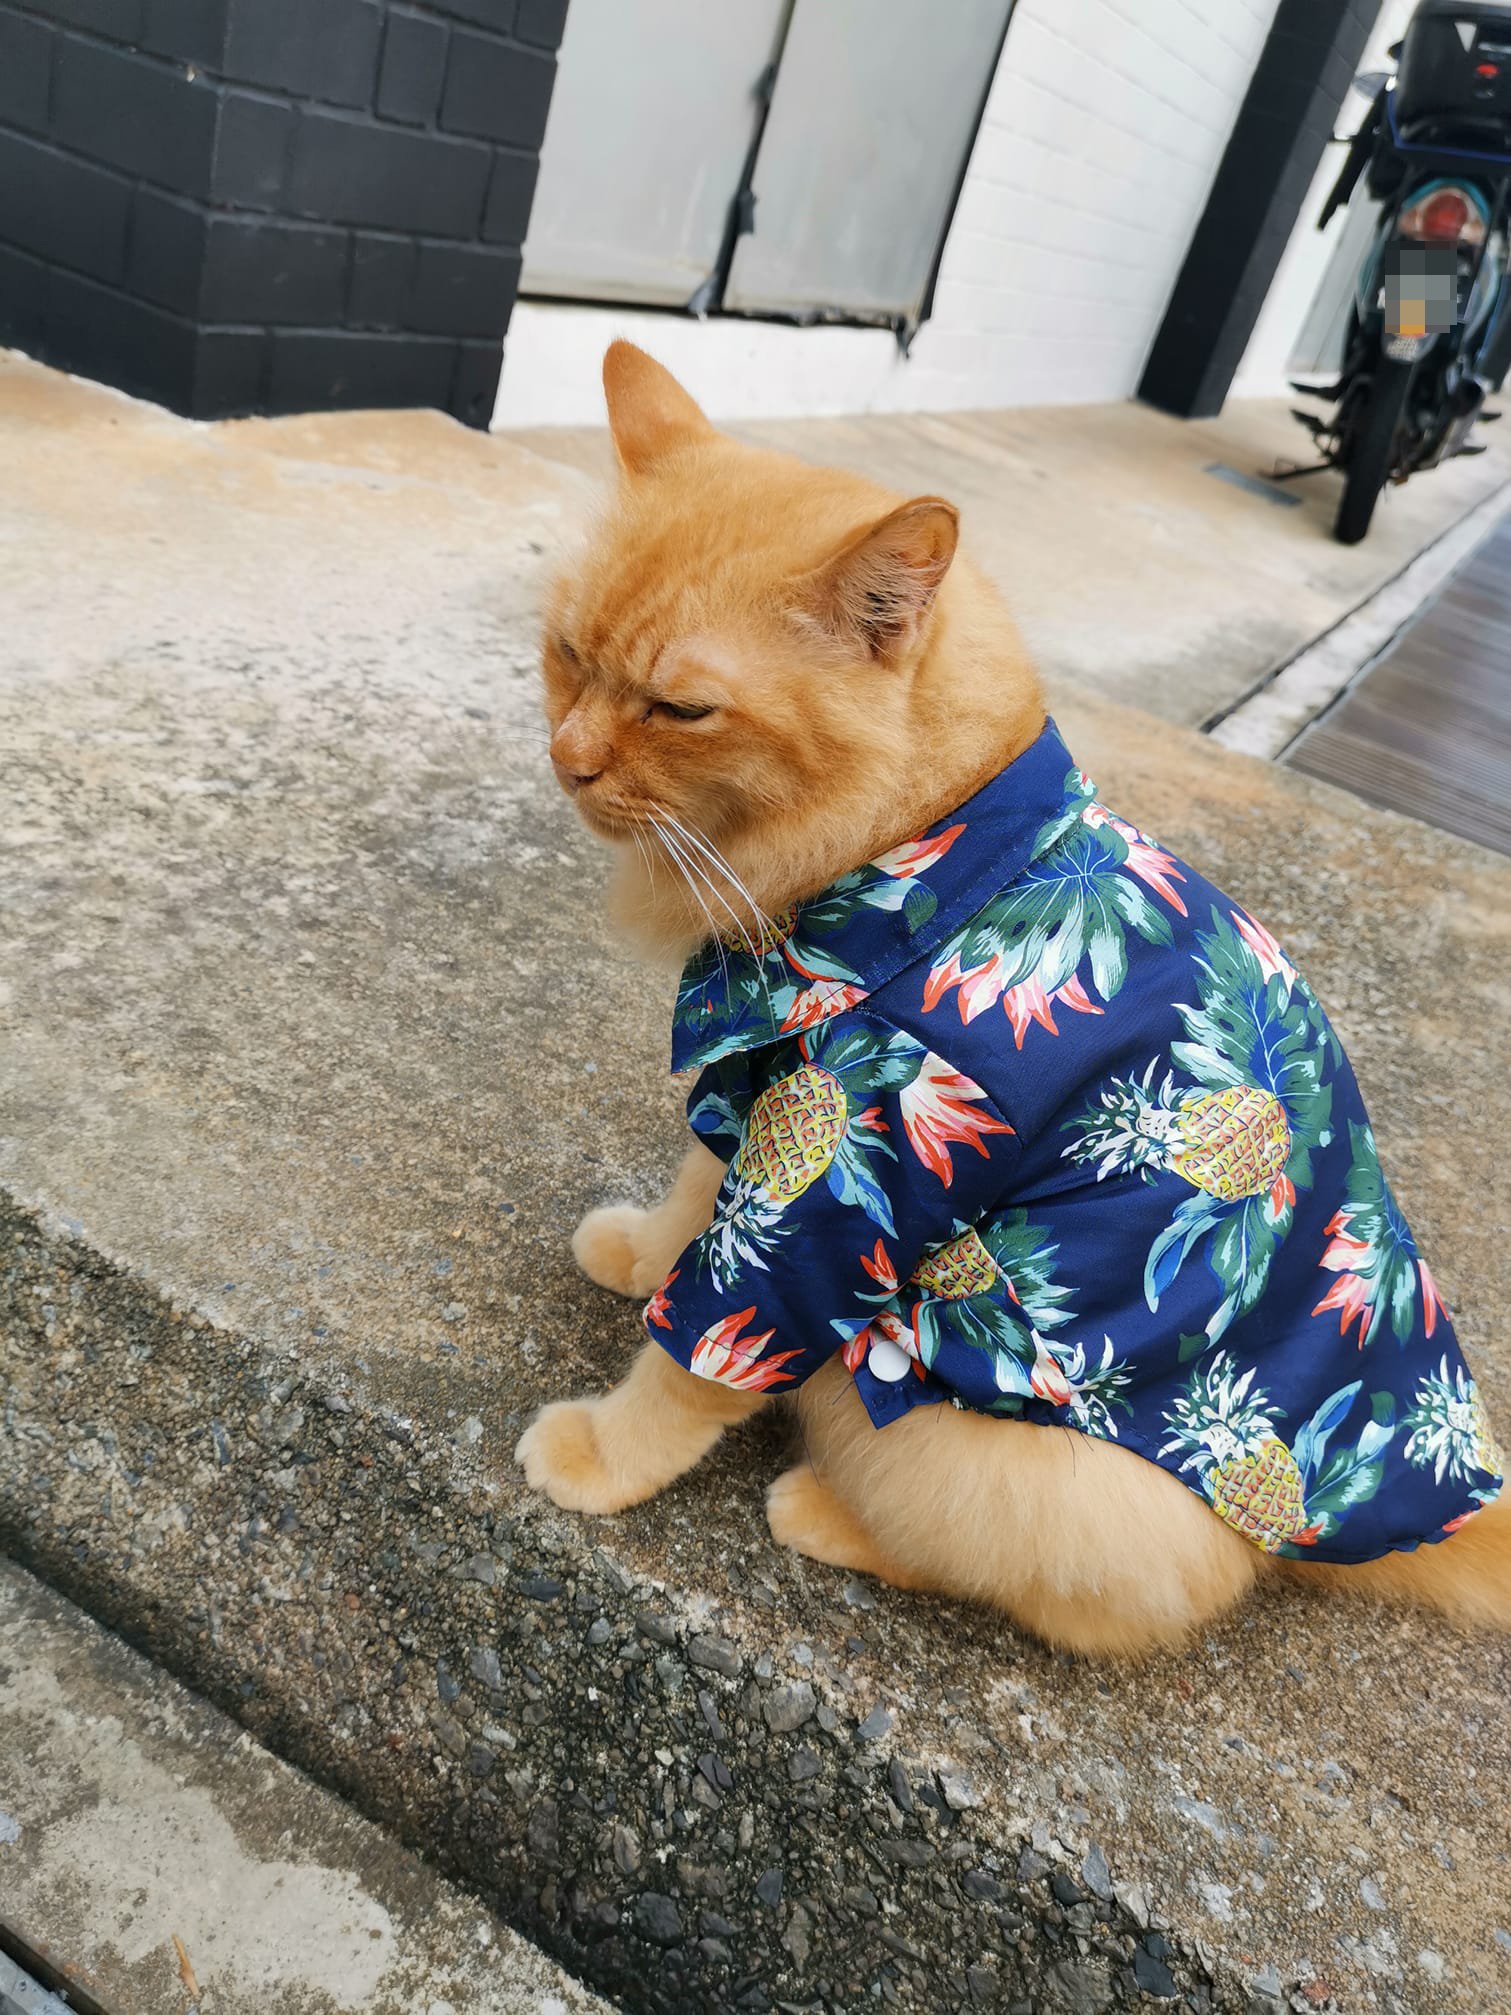 Cat In Adorable Hawaiian Shirt Spotted At Tampines, Animal Lovers